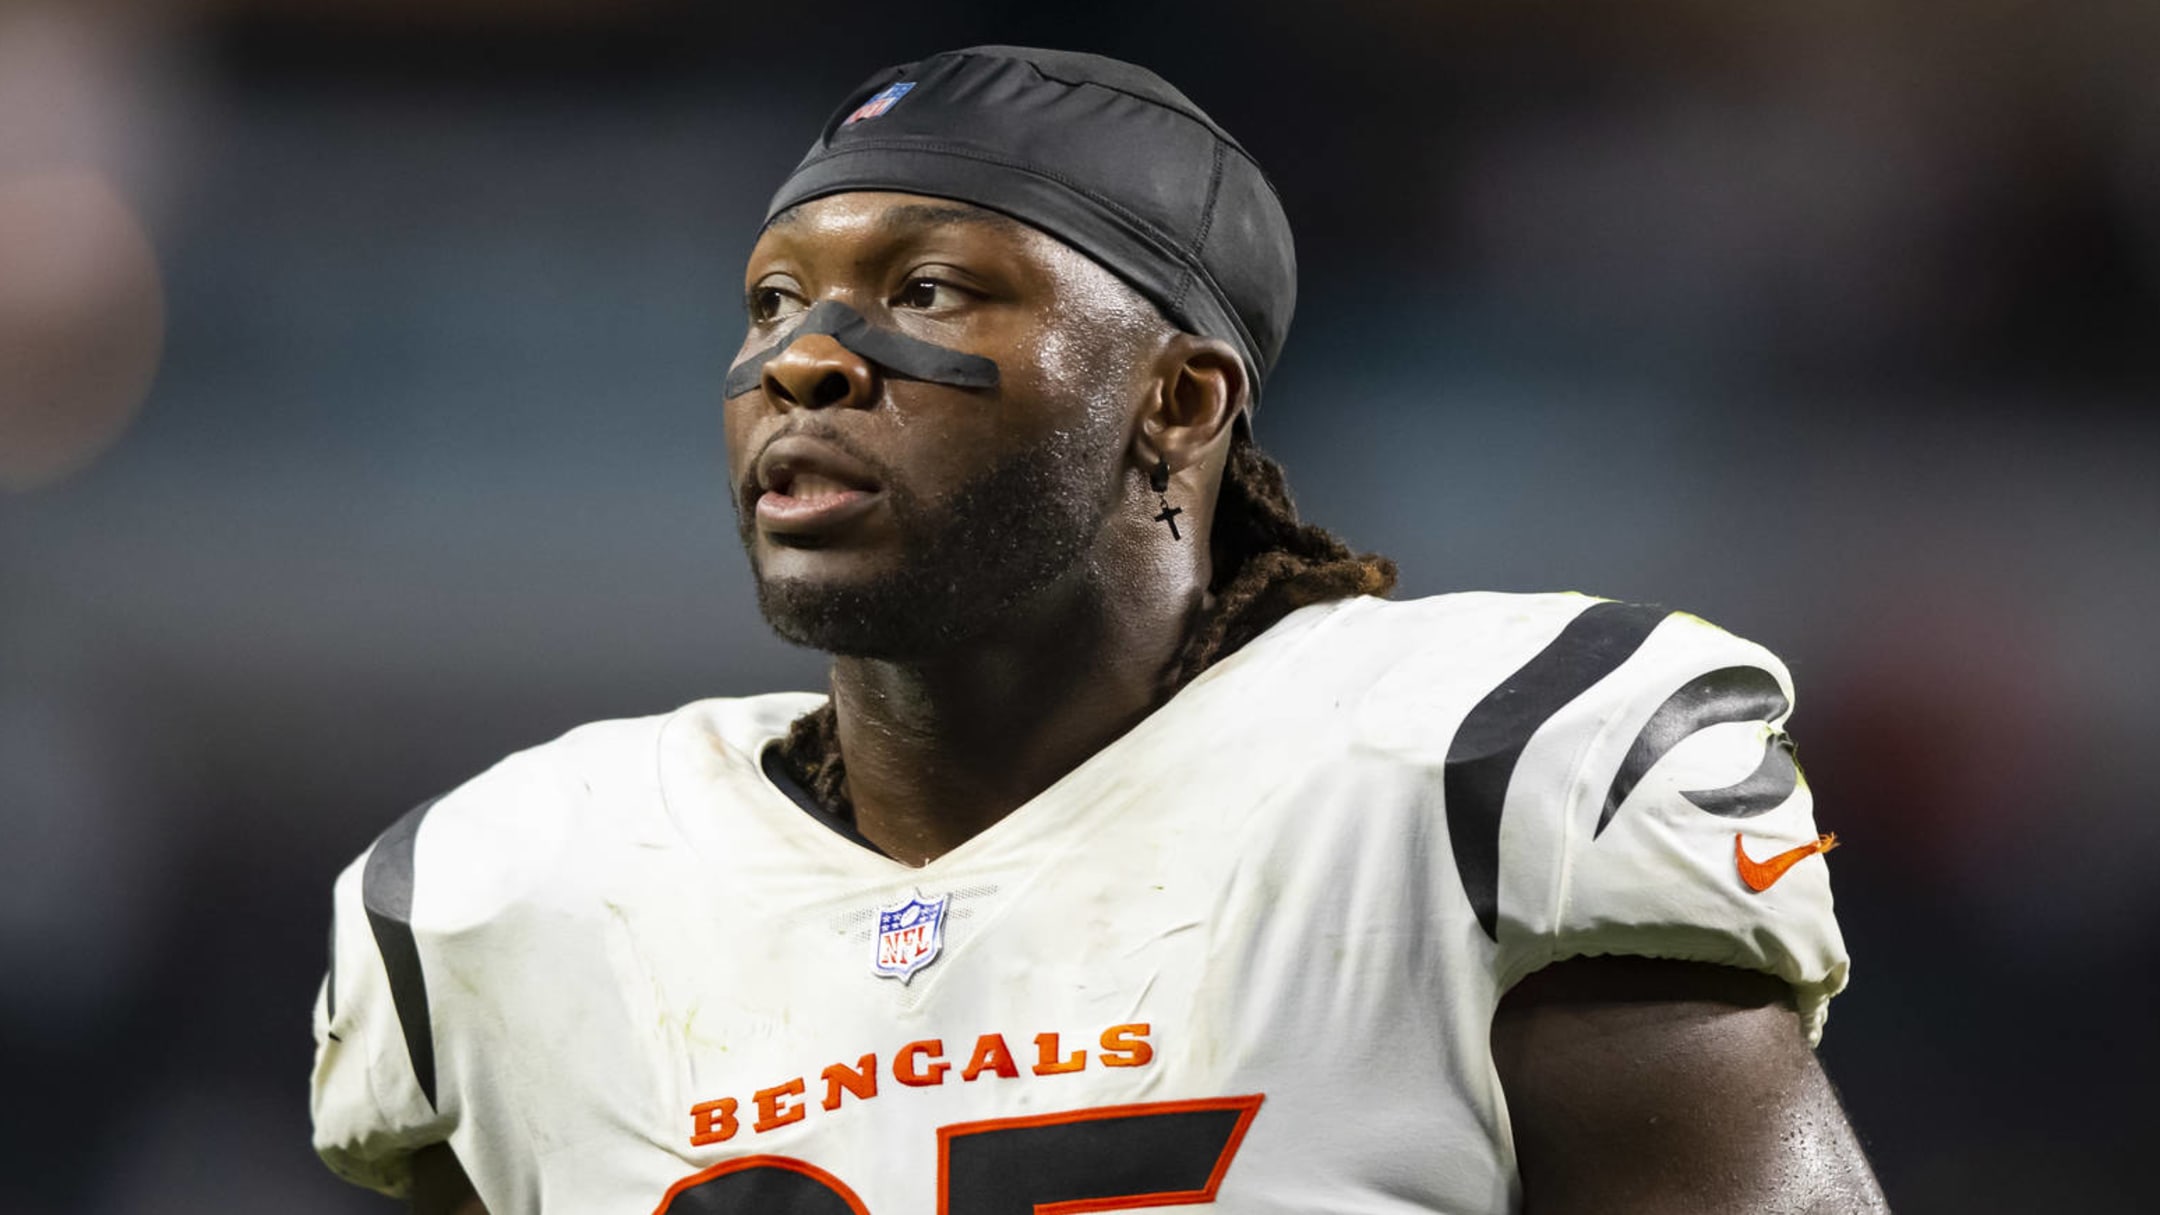 Bengals DT Ogunjobi out of playoff game with foot injury